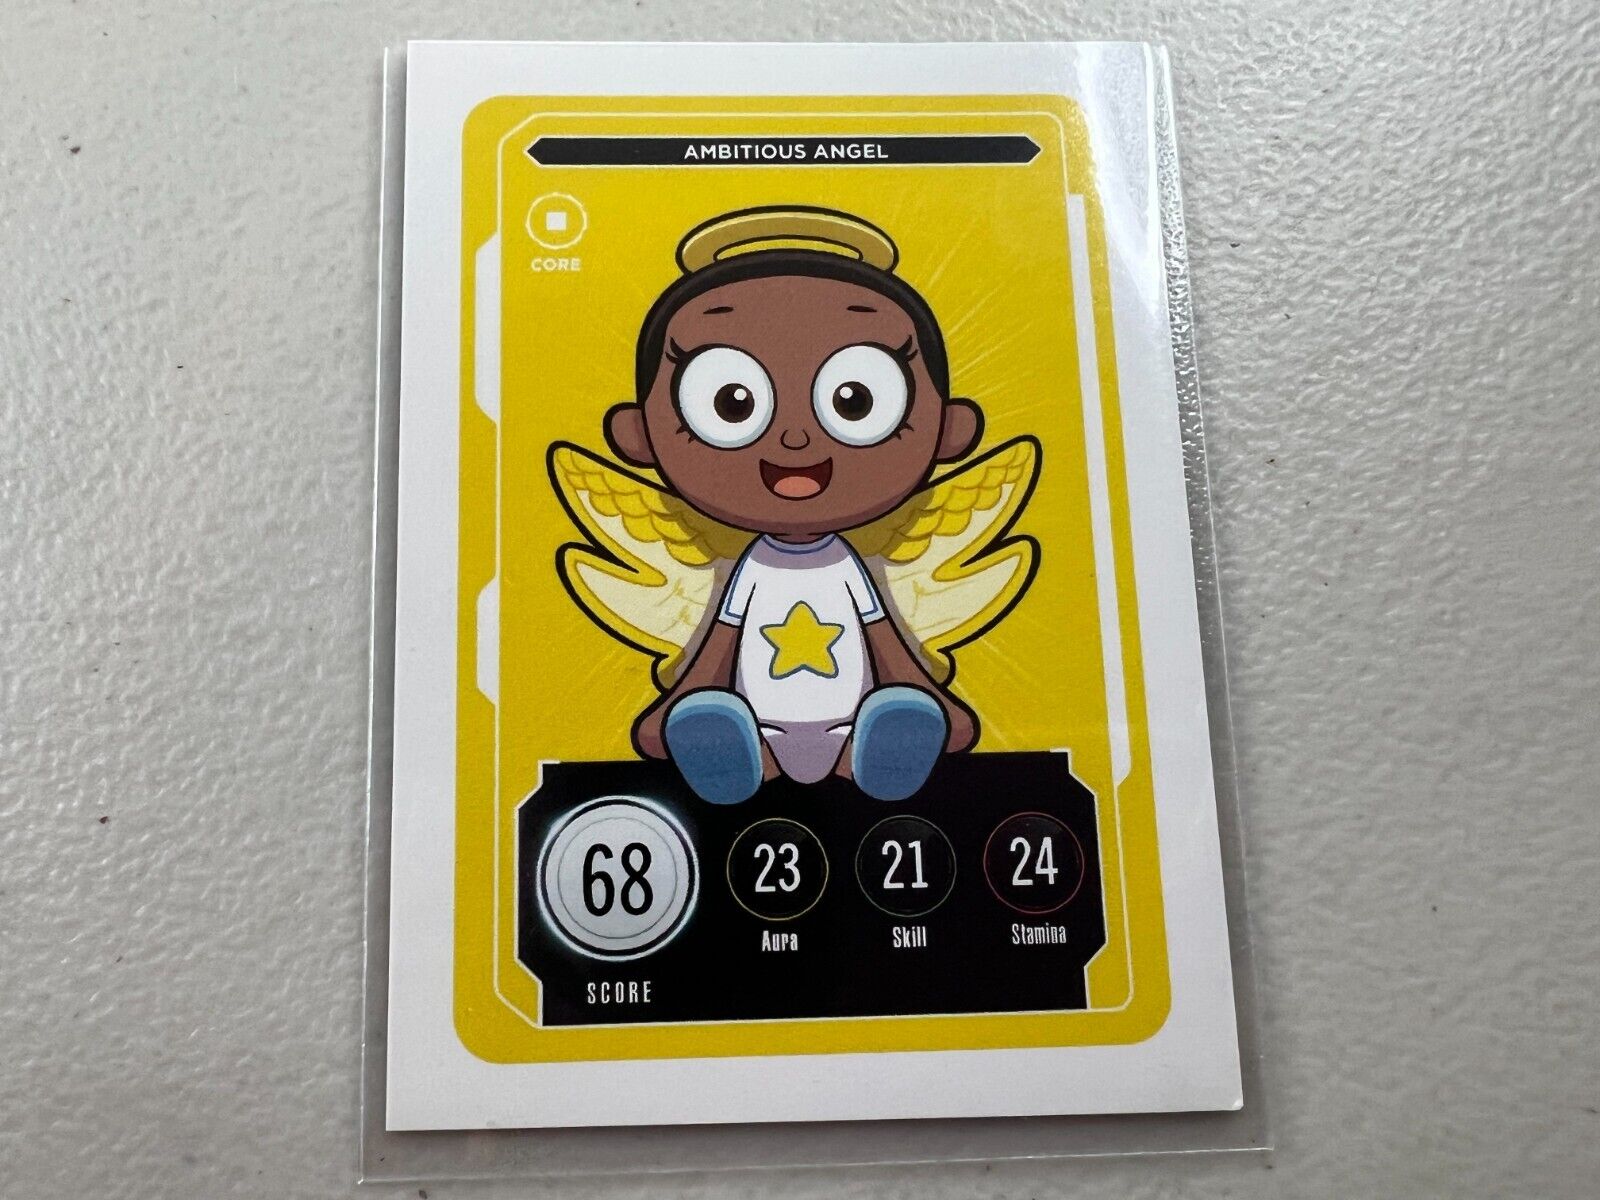 VeeFriends Ambitious Angel Series 2 Core Card Compete and Collect Gary Vee